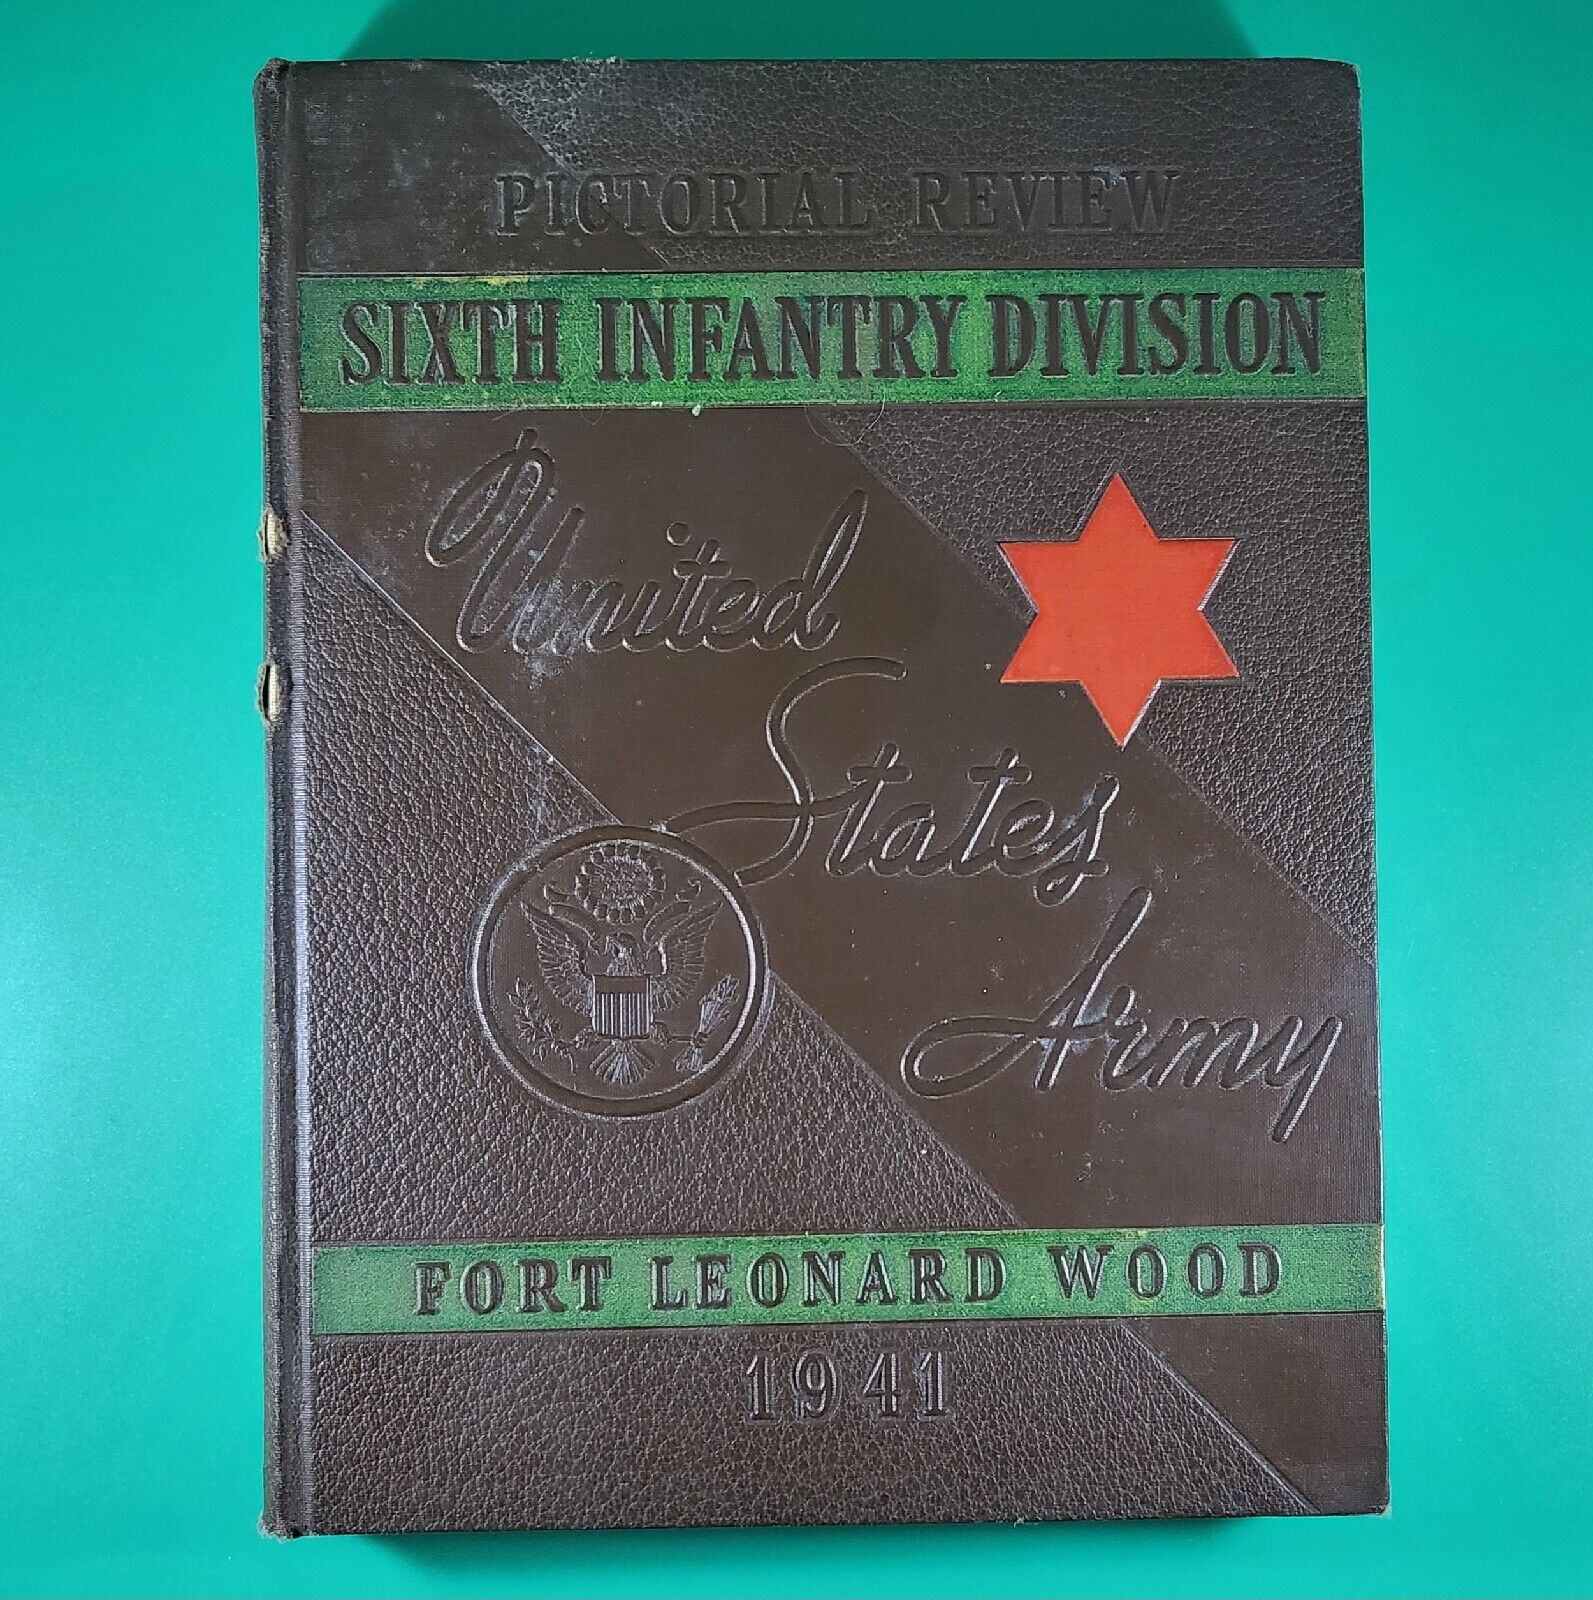 WWII 1941 6TH INFANTRY DIVISION - US ARMY PICTORIAL REVIEW FORT LEONARD WOOD